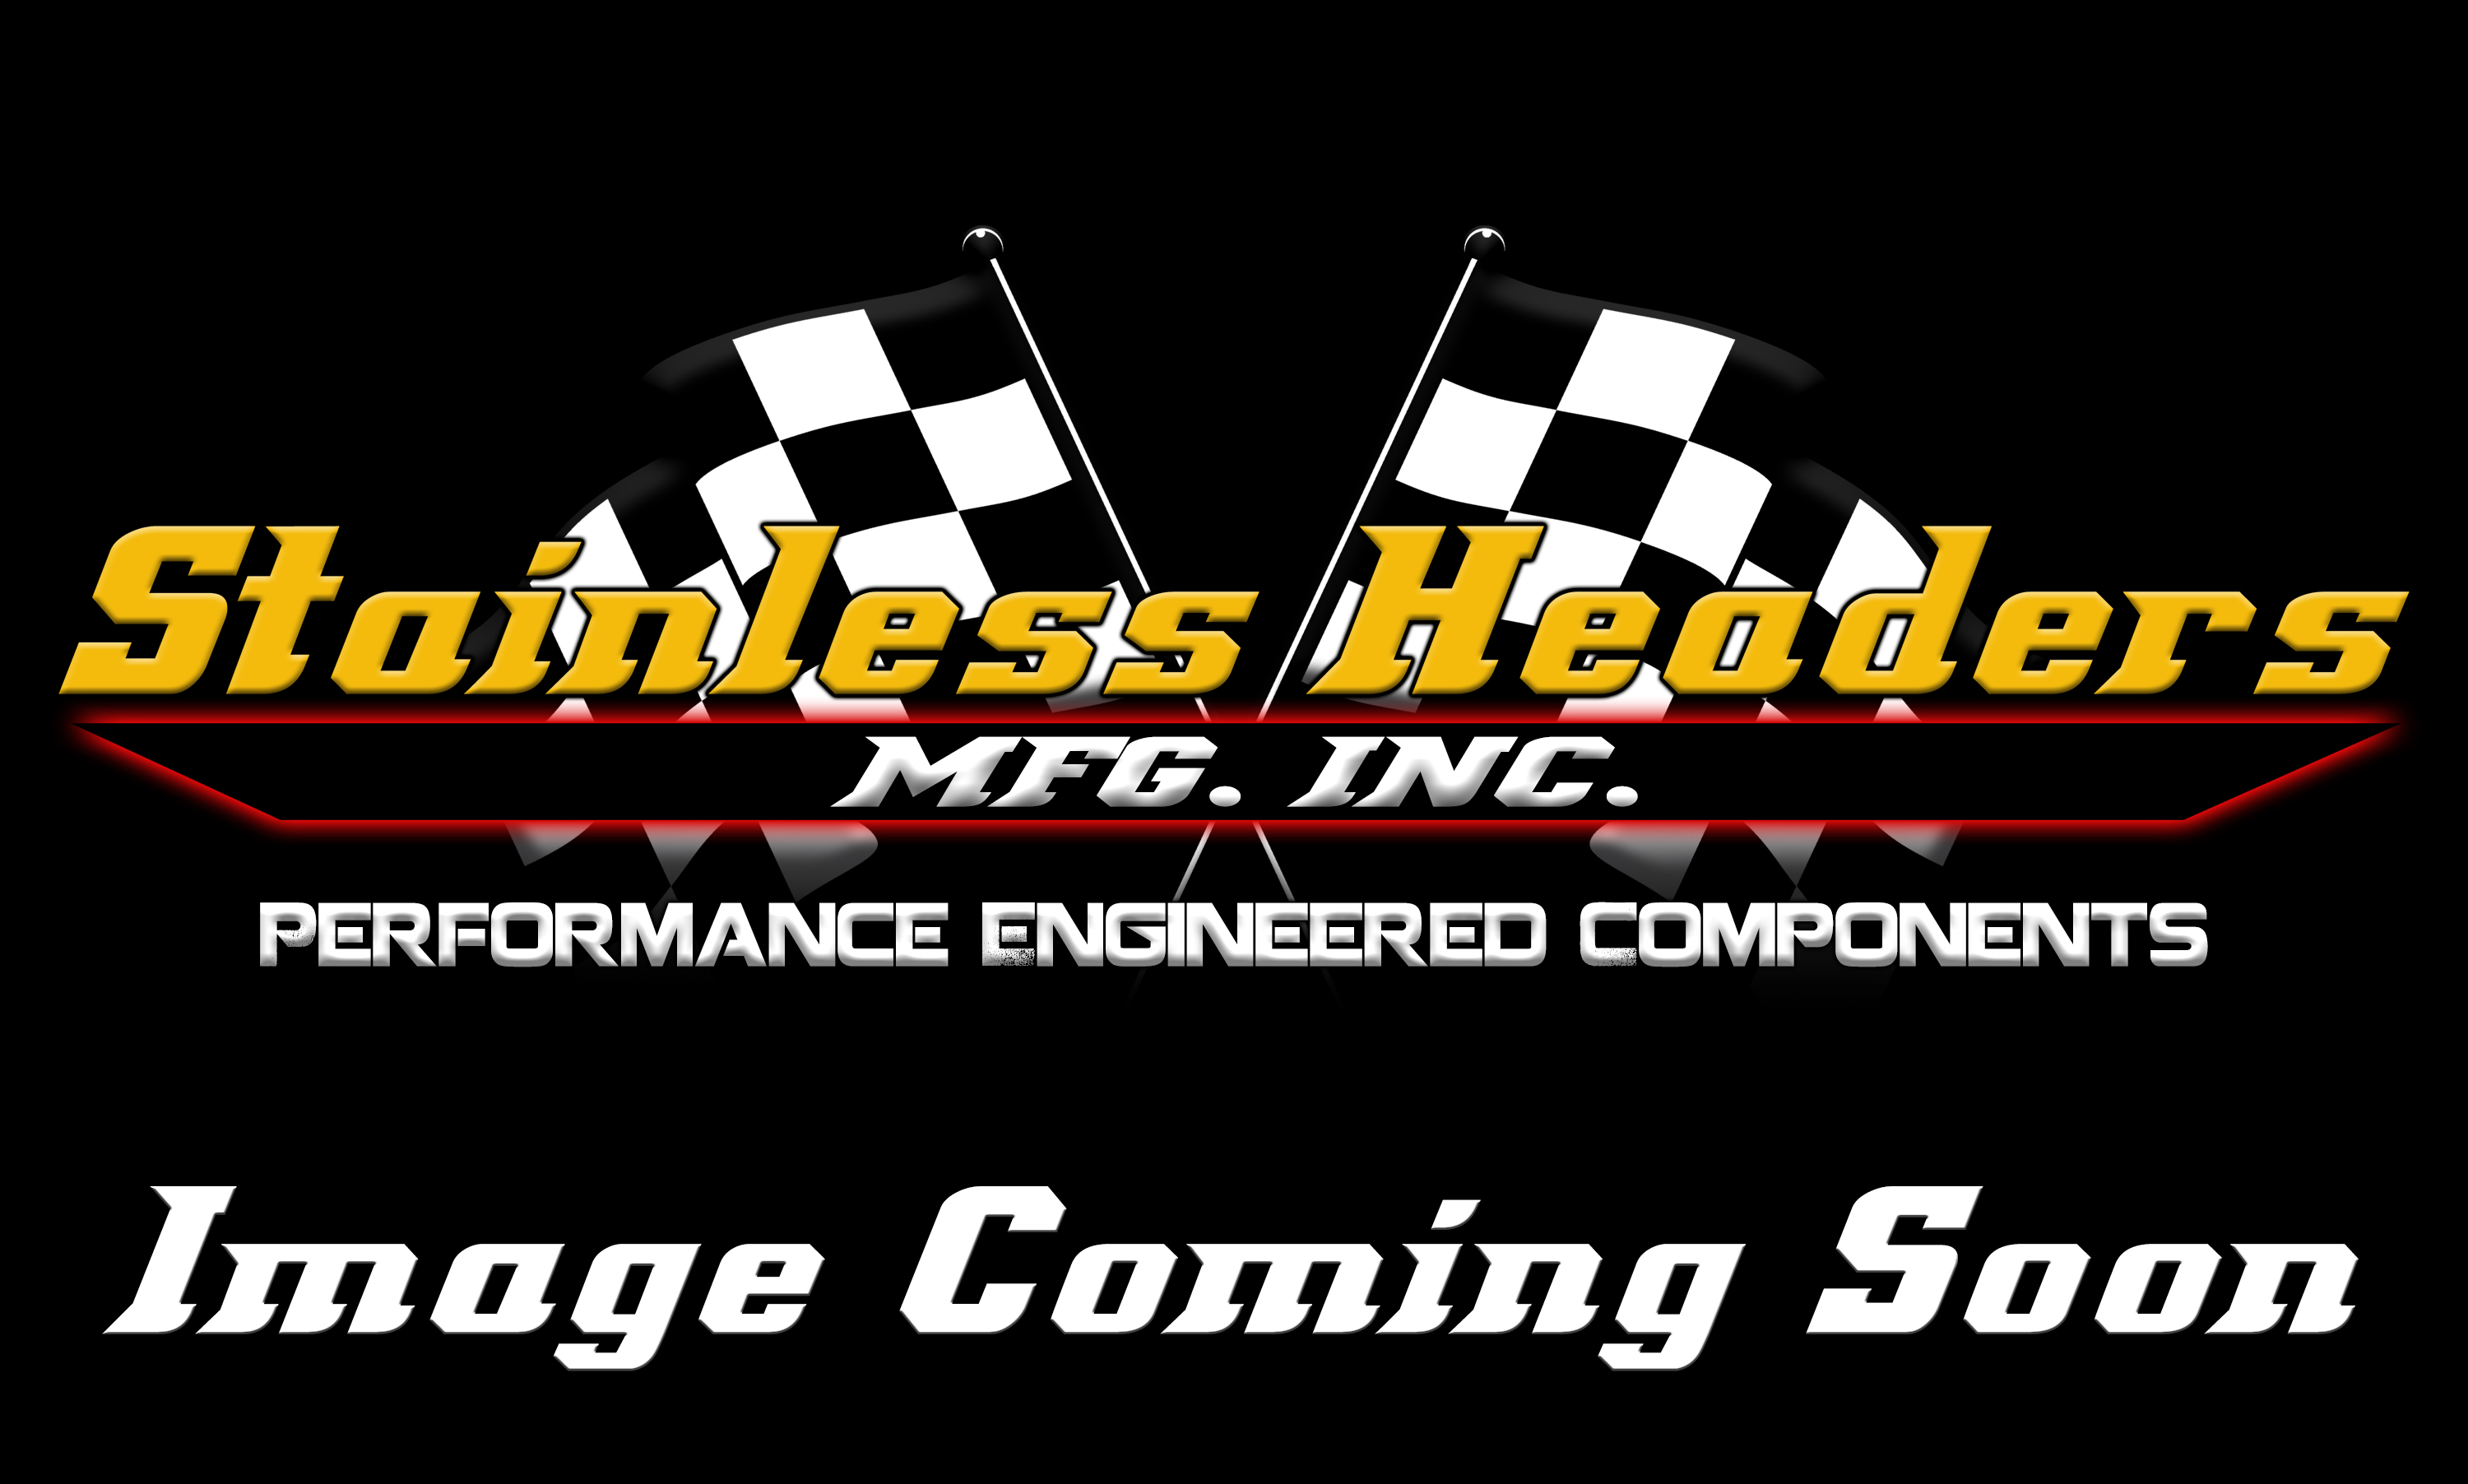 CompTurbo Technology Turbochargers - Comp Turbo Triple Ball Bearing Oil-Less 3.0 Turbochargers - CompTurbo Technologies - CTR4202R-7285 Mid Frame Oil-Less 3.0 Turbocharger (1250 HP)